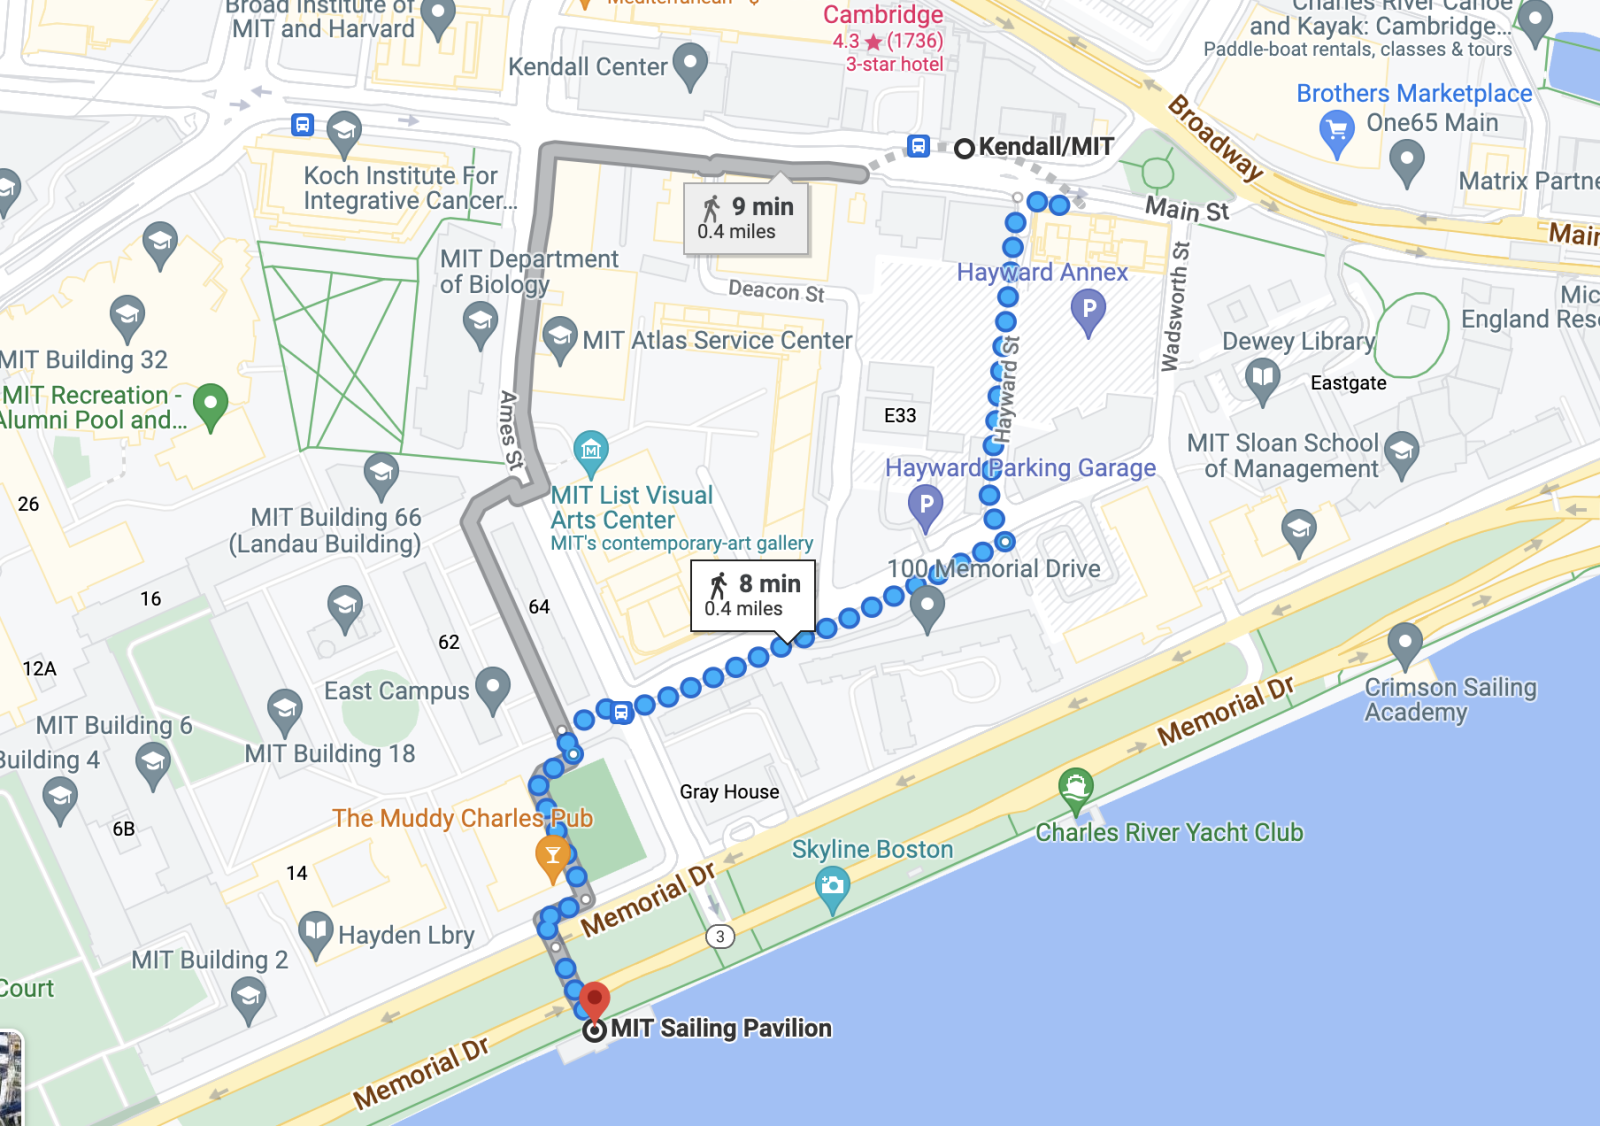 Google Map rendering of Kendal Square in Cambridge, MA showing walking directions to MIT Sailing Pavilion